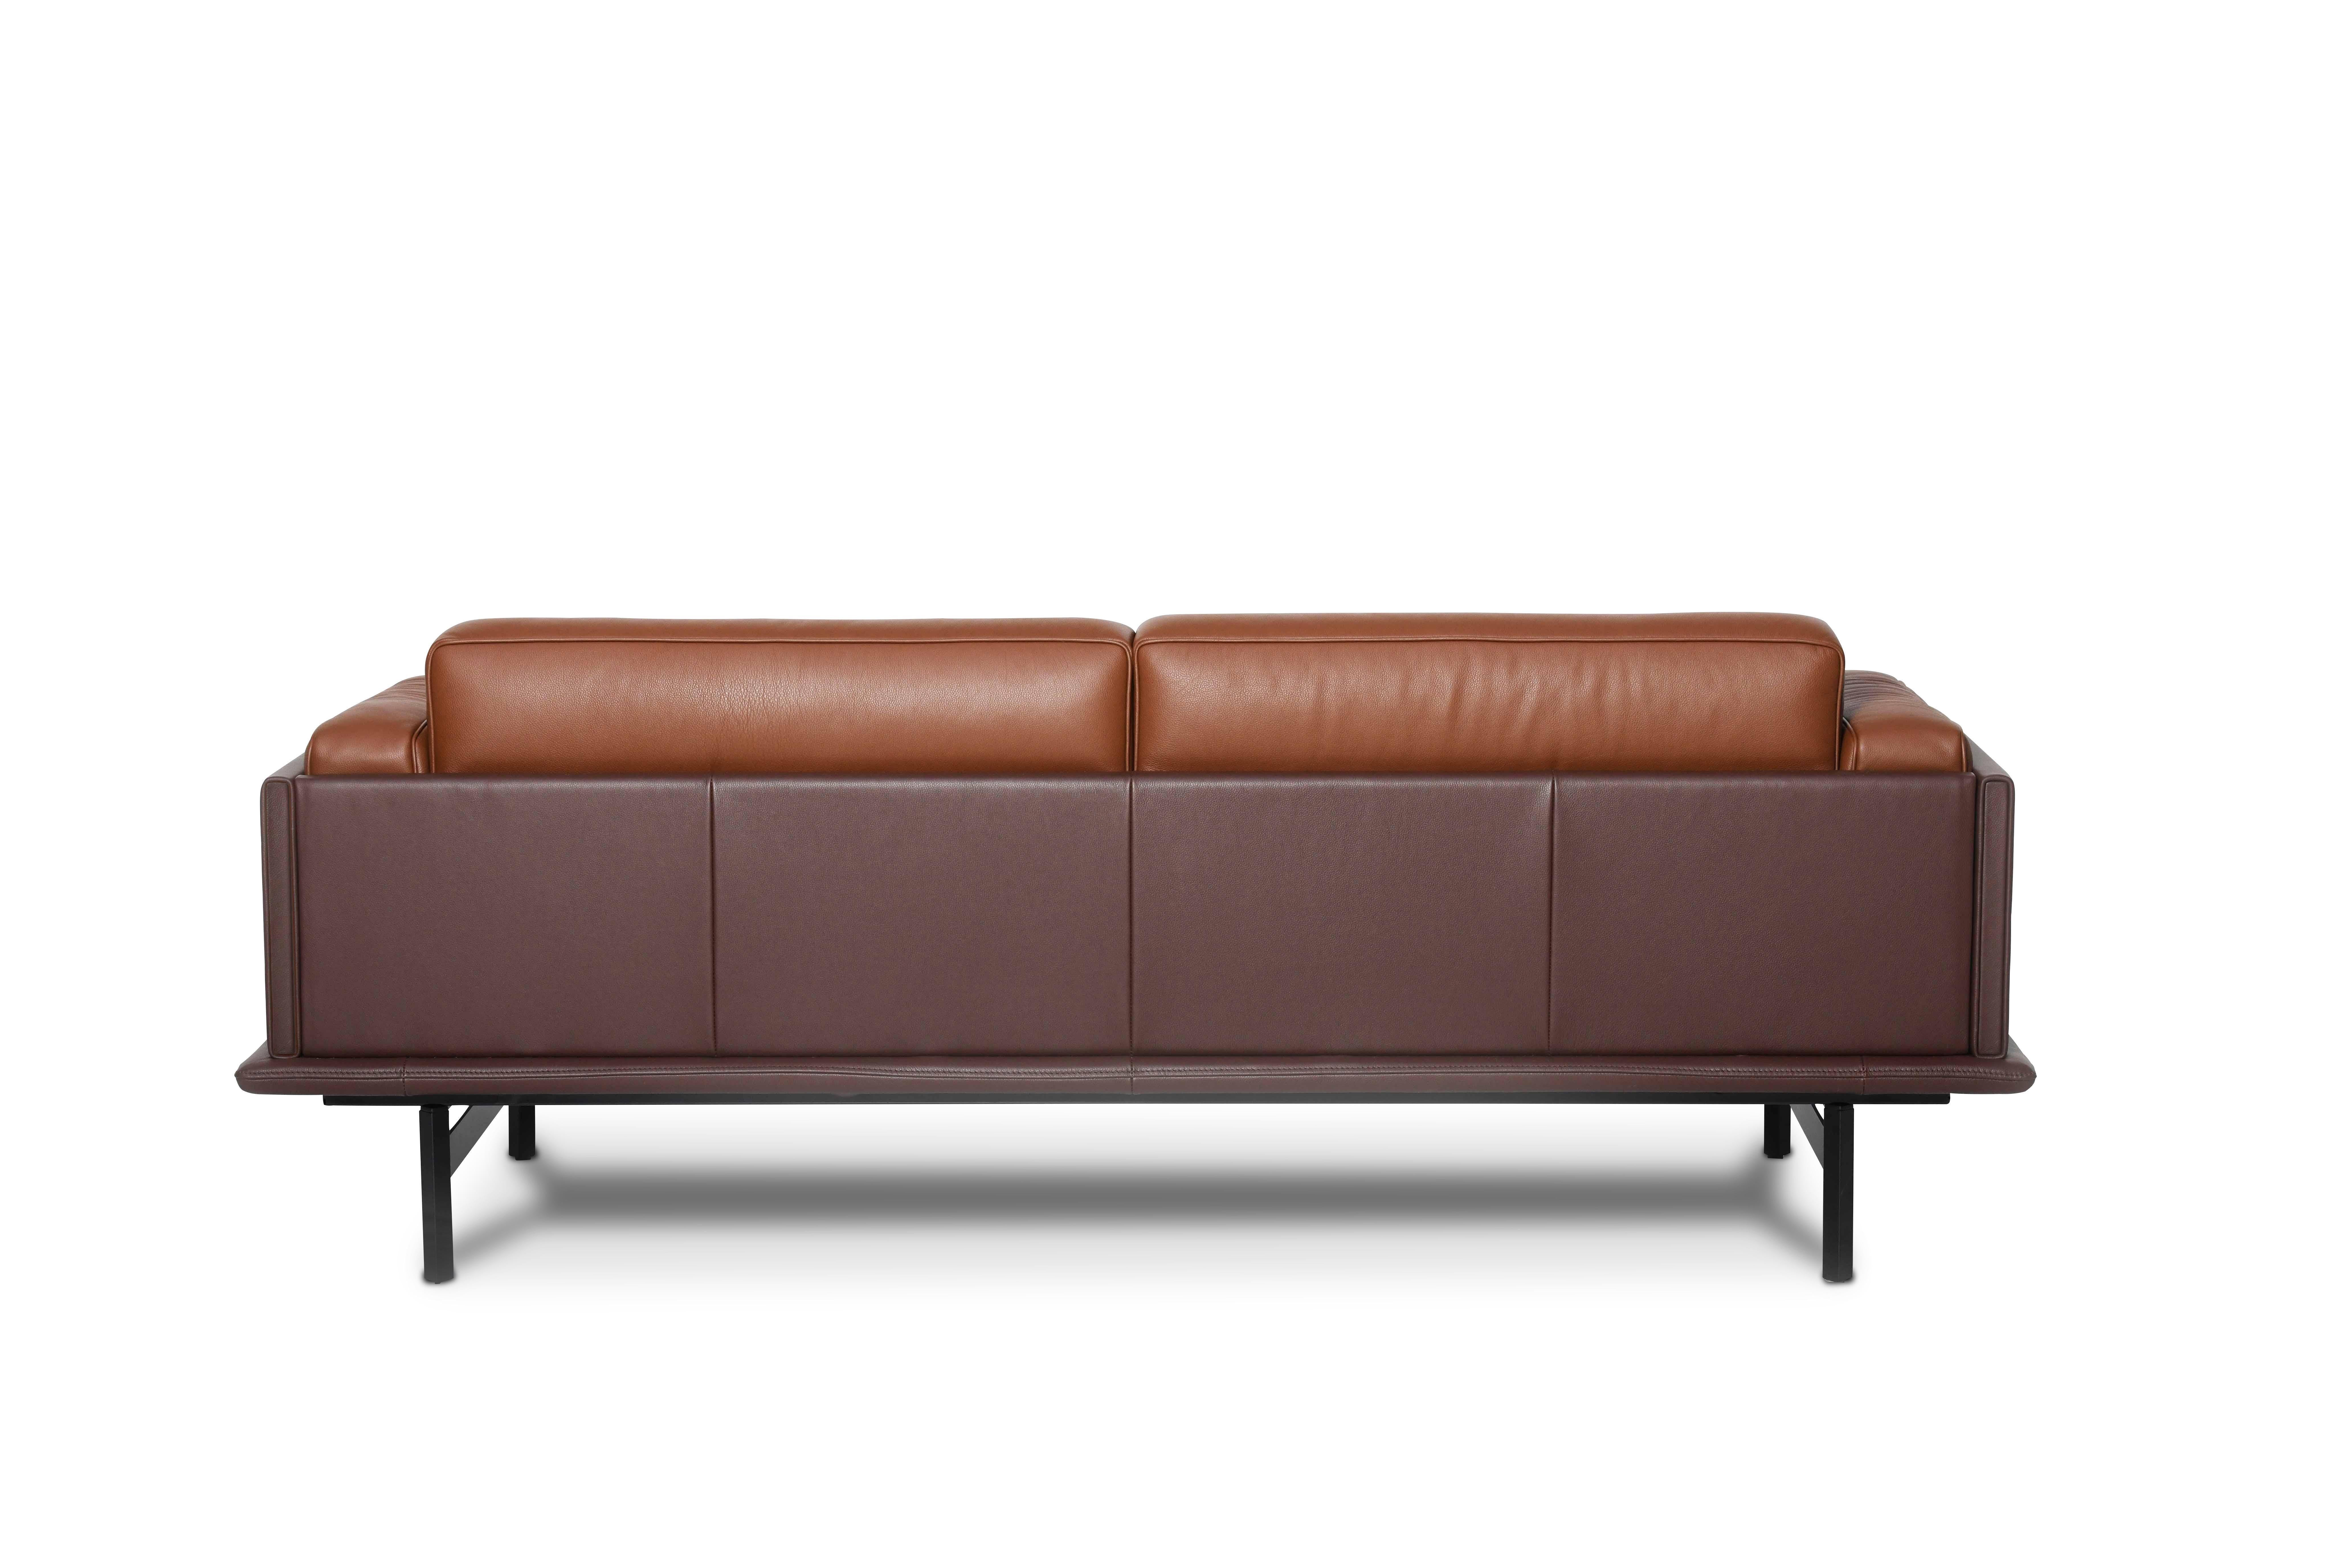 Modern De Sede DS-175 Medium Two-Seat Sofa in Hazel Upholstery by Patrick Norguet For Sale